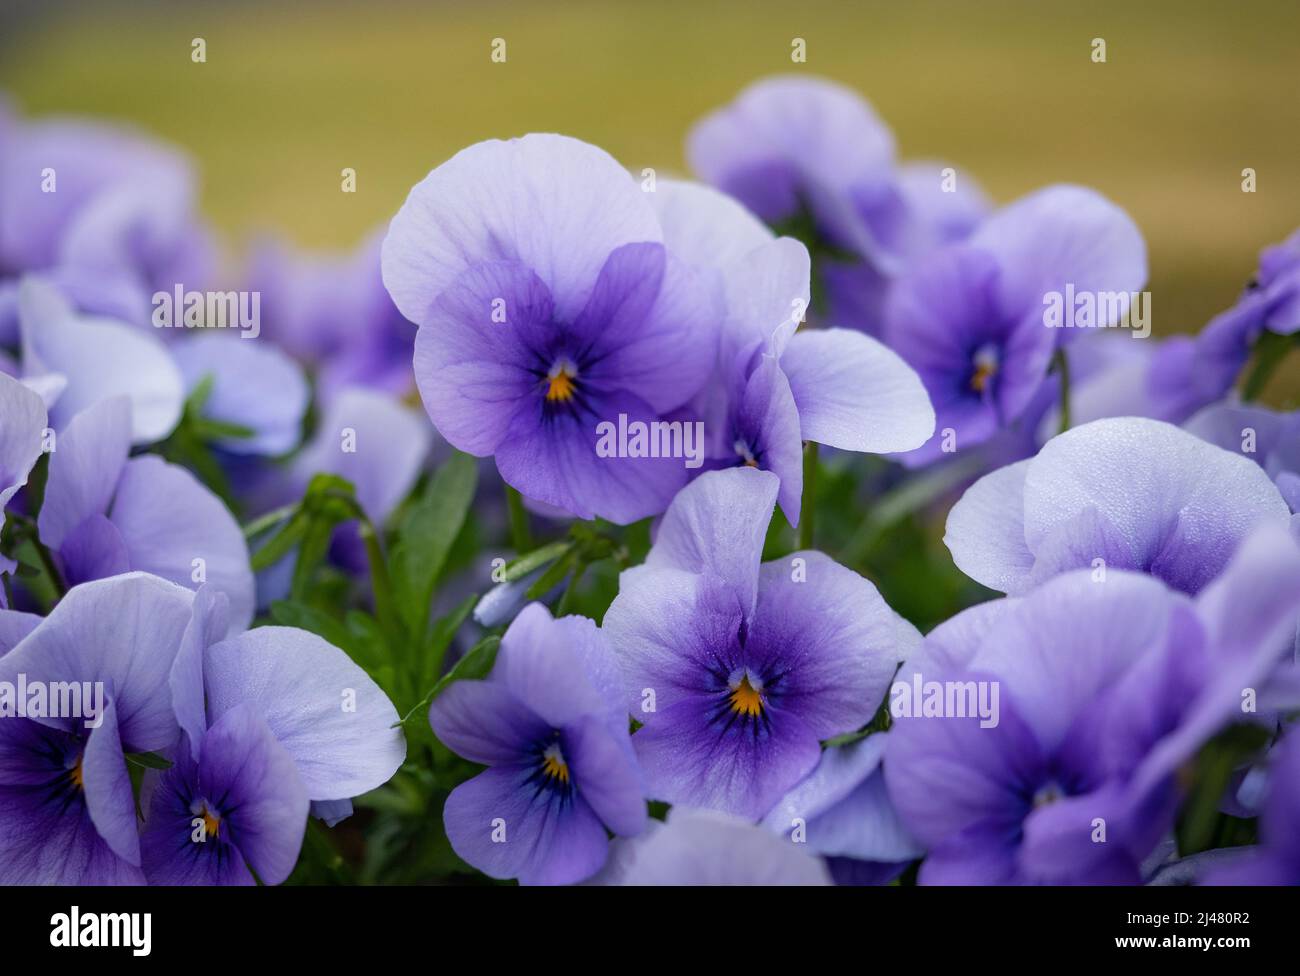 Ornamental purple flowers with yellow pollen with grass in the background. Stock Photo